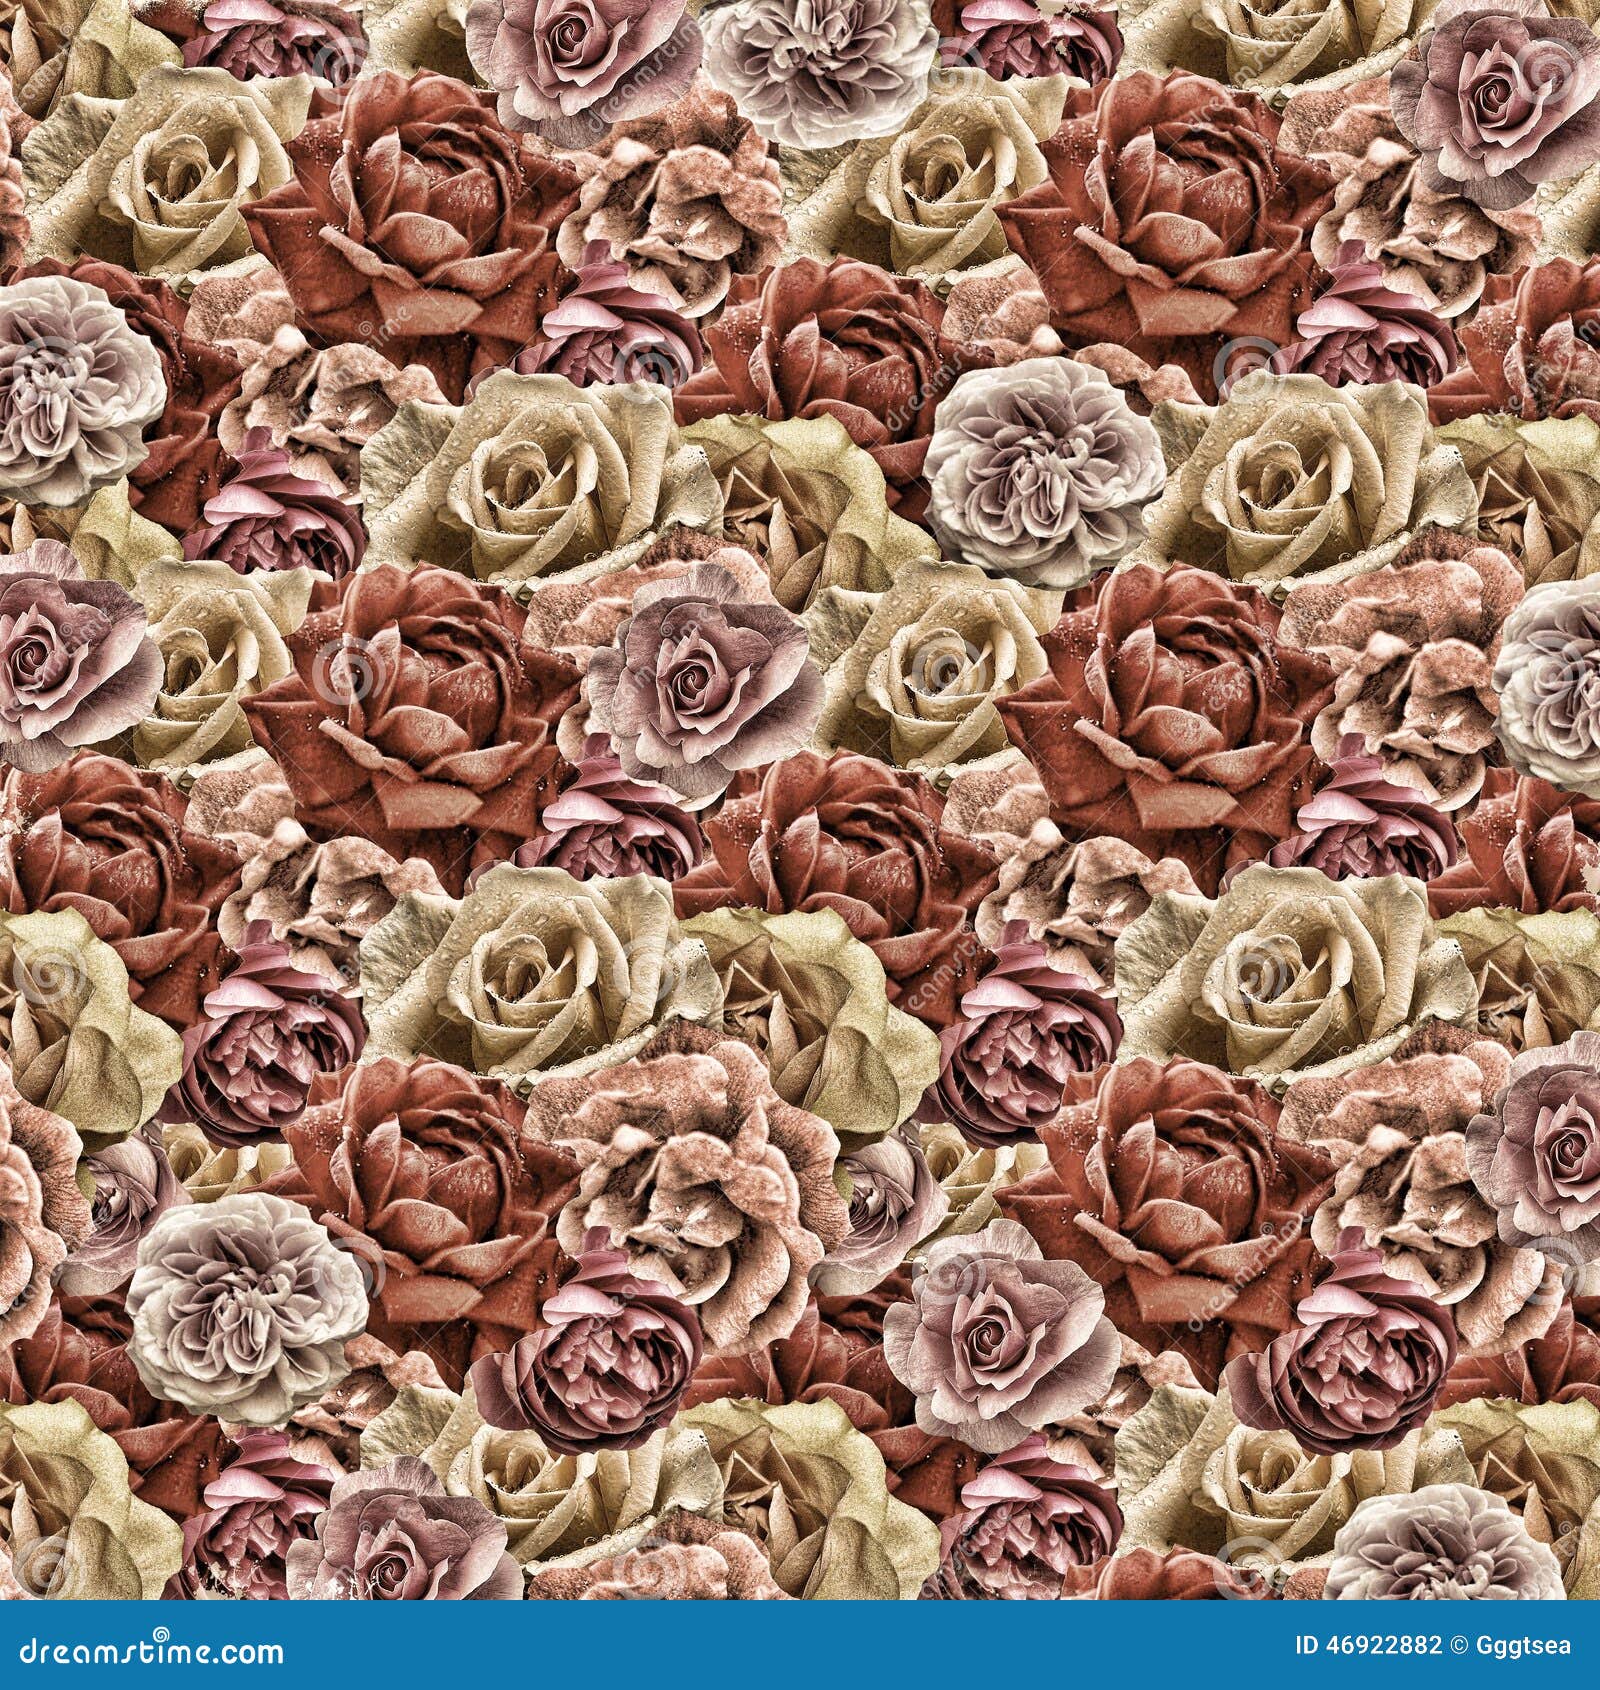 Old roses paper wallpaper stock photo. Image of graphic - 46922882